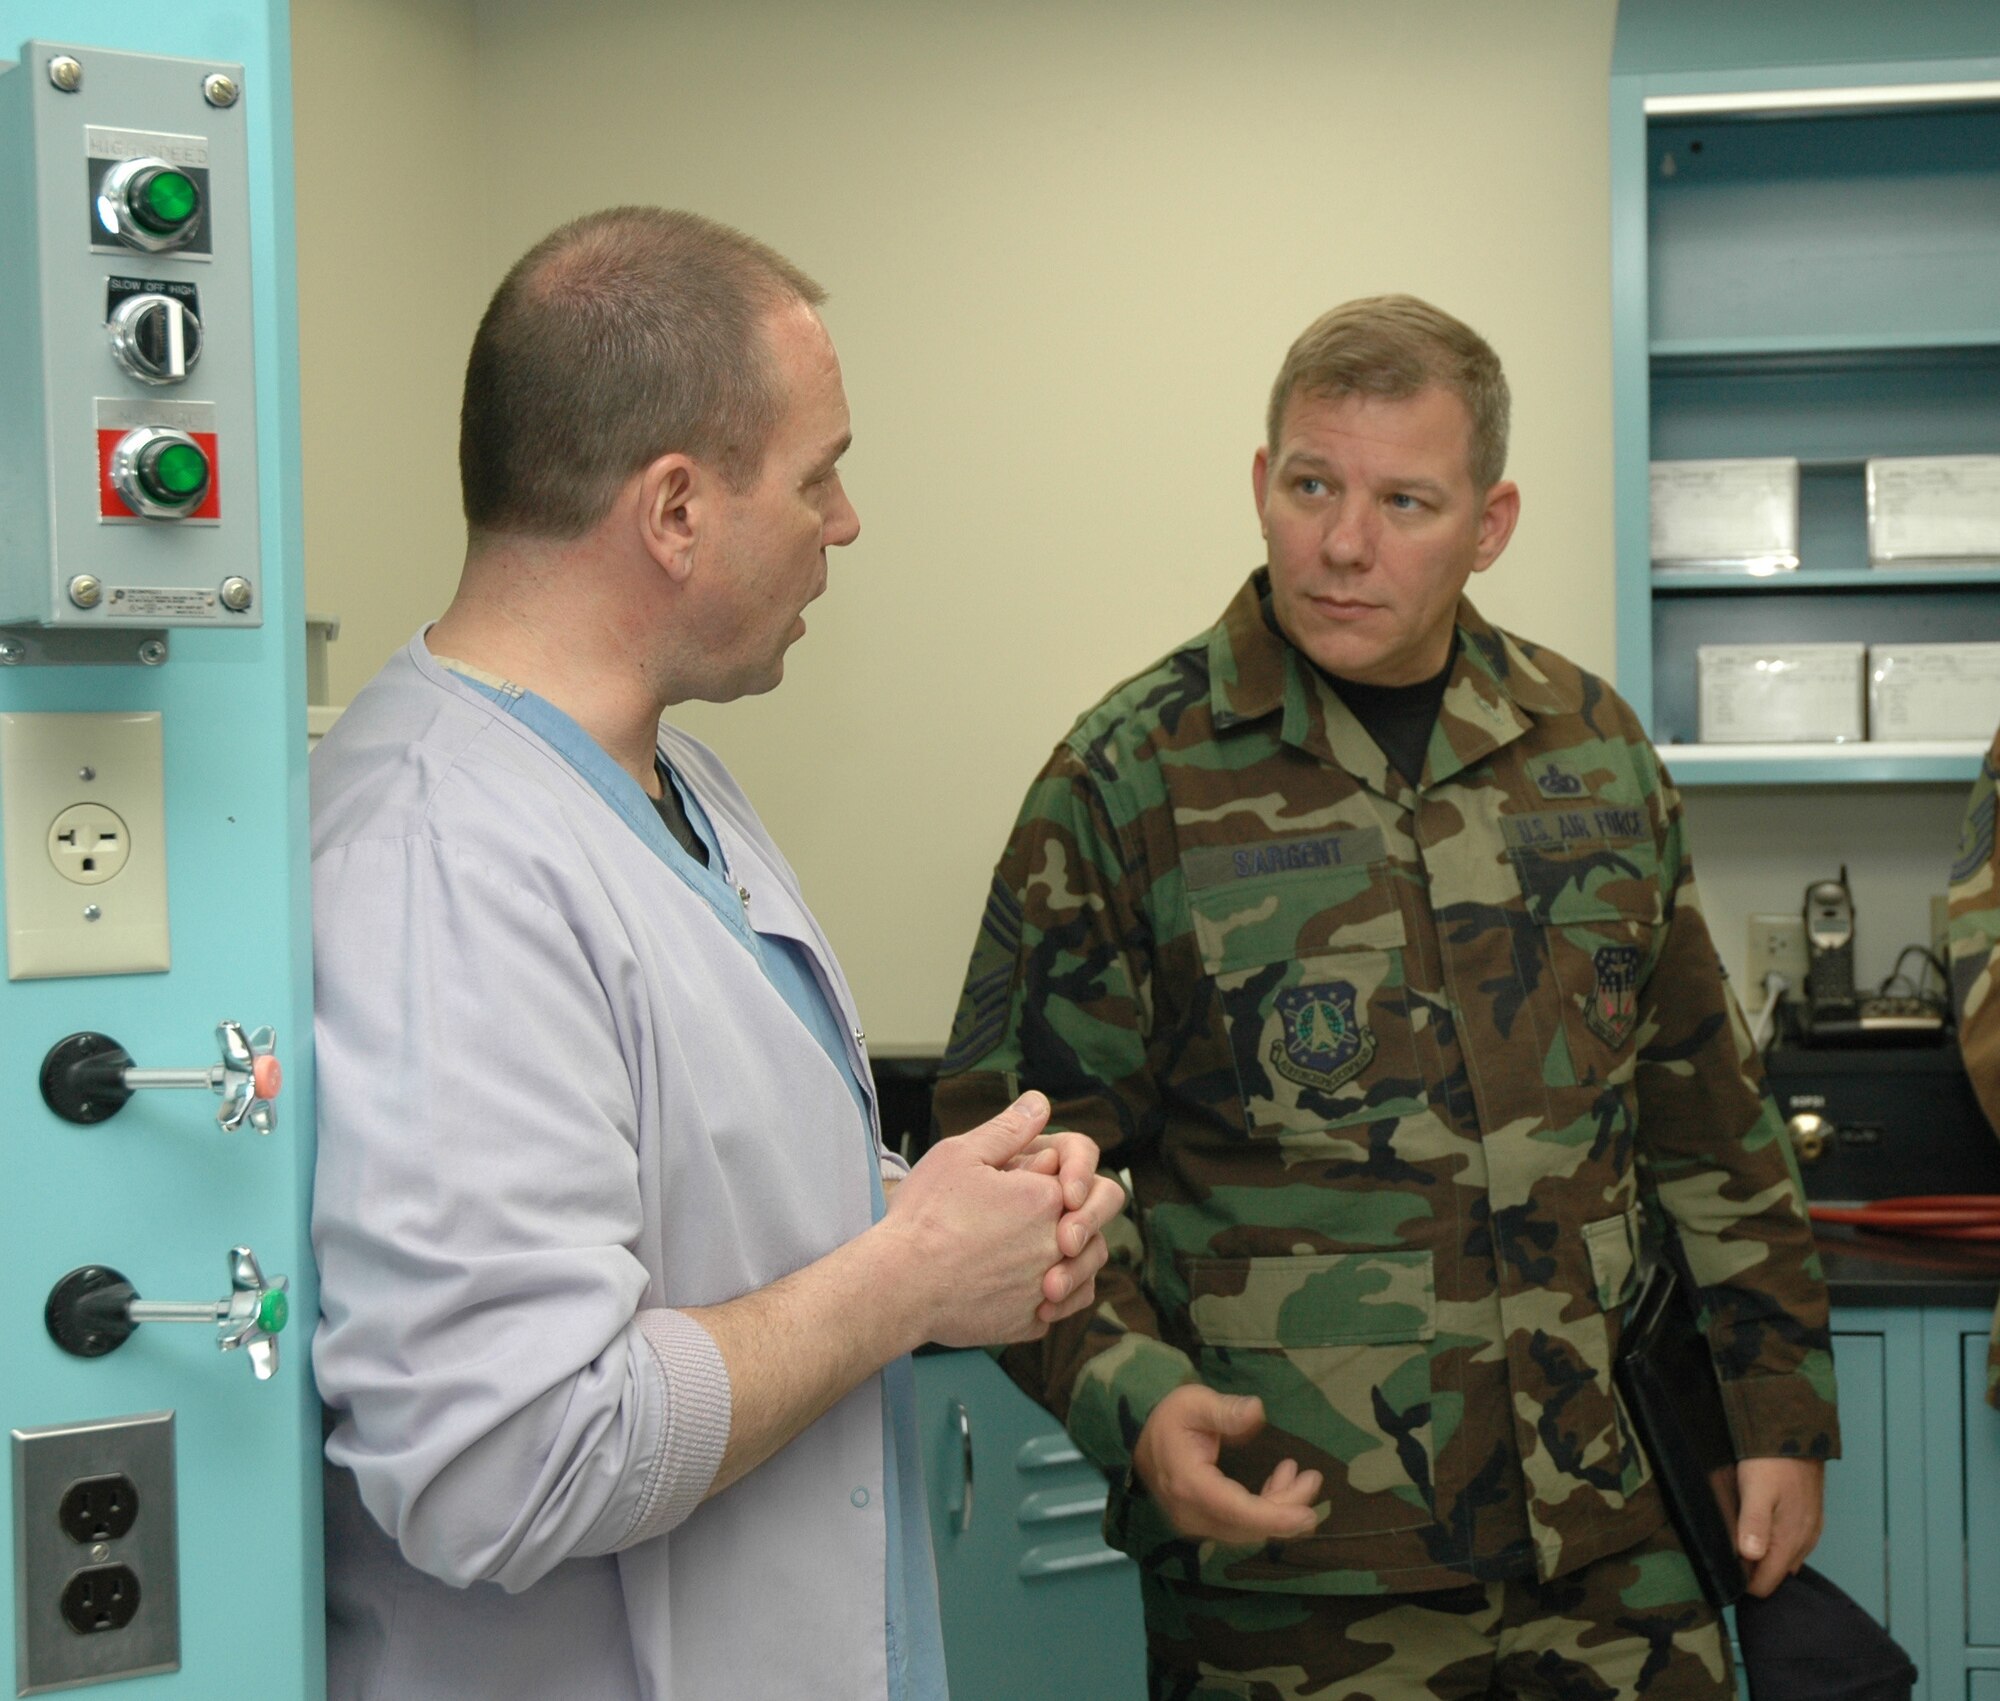 Chief Master Sgt. Steve Sargent, 341st Space Wing command chief, discusses lab practices with Tech. Sgt. Richard Petrucci, dental lab technician, during a tour of the clinic April 9.